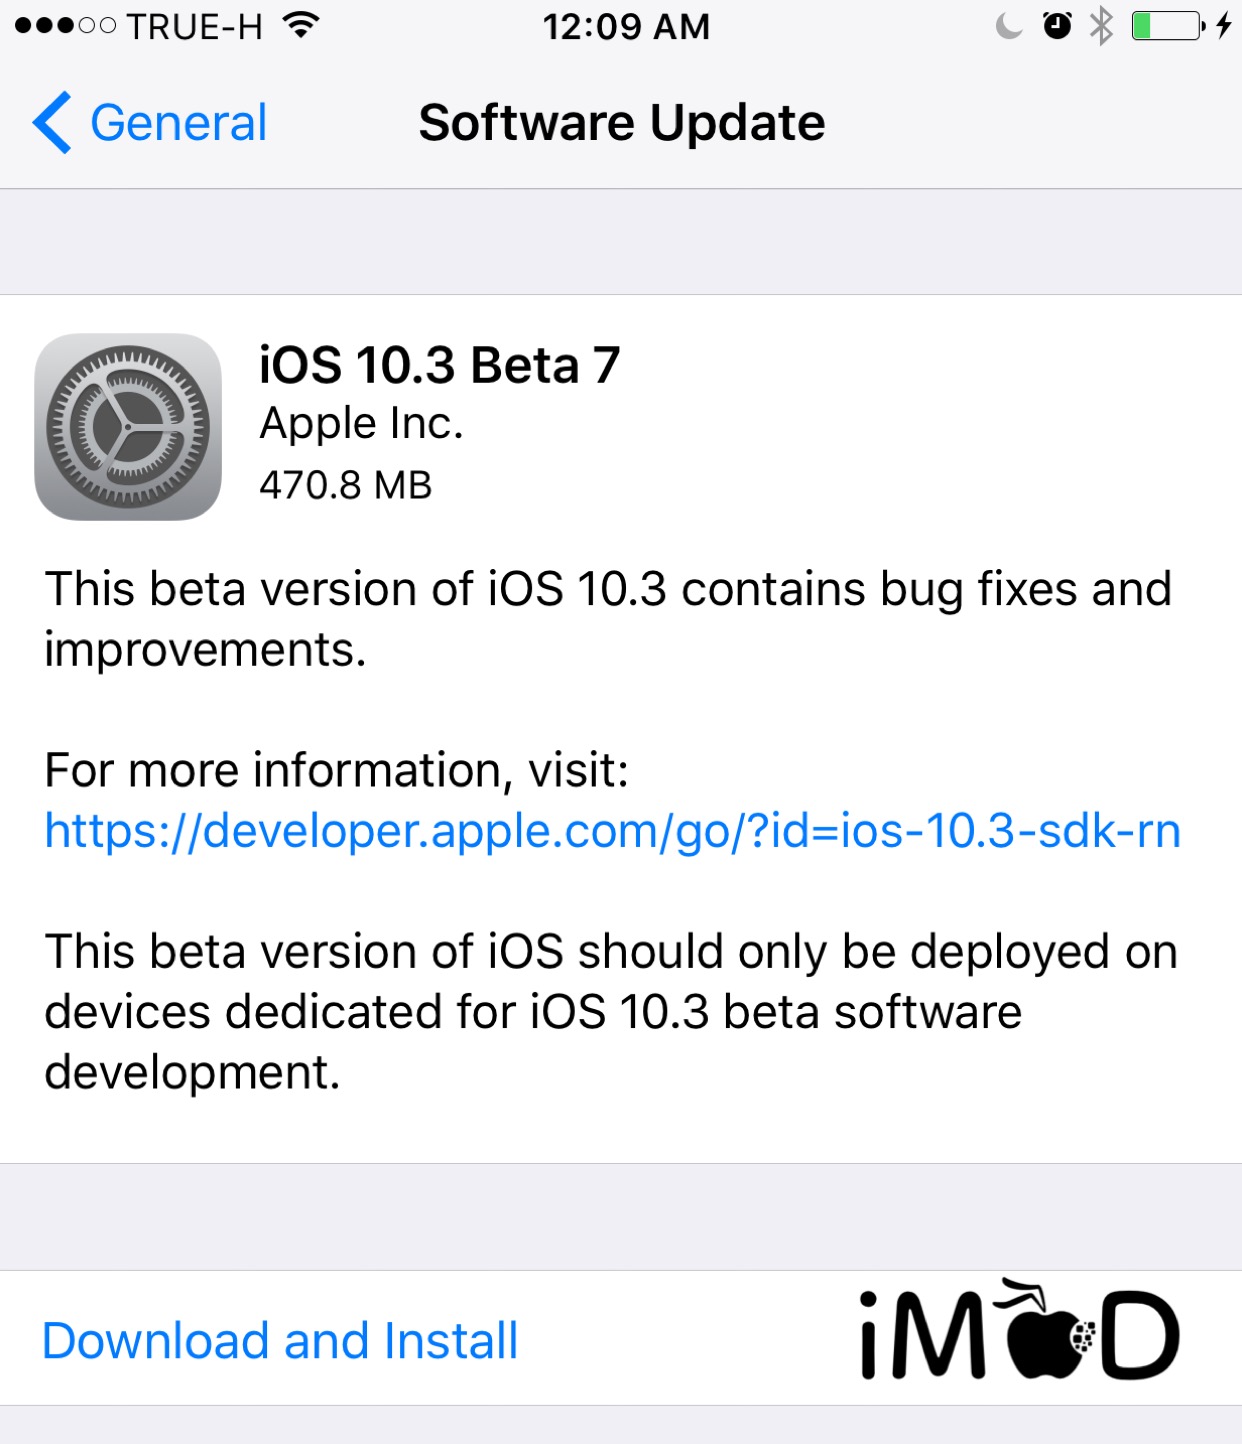 download the new for ios Install4j 10.0.6